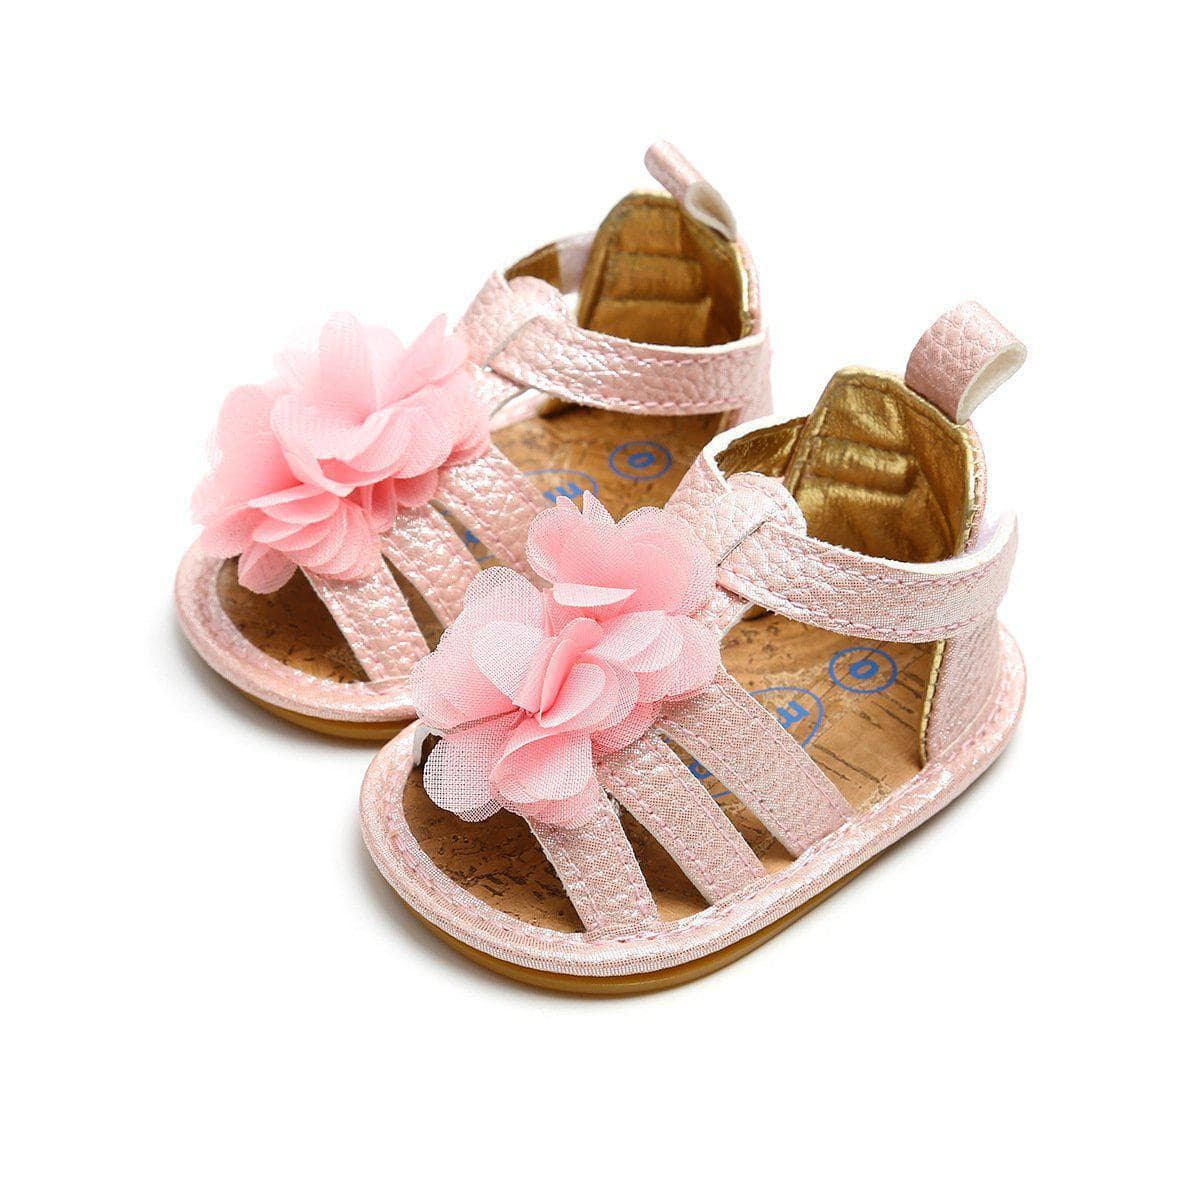 Baby Big floral Hollow Out Shoes 0-18m.